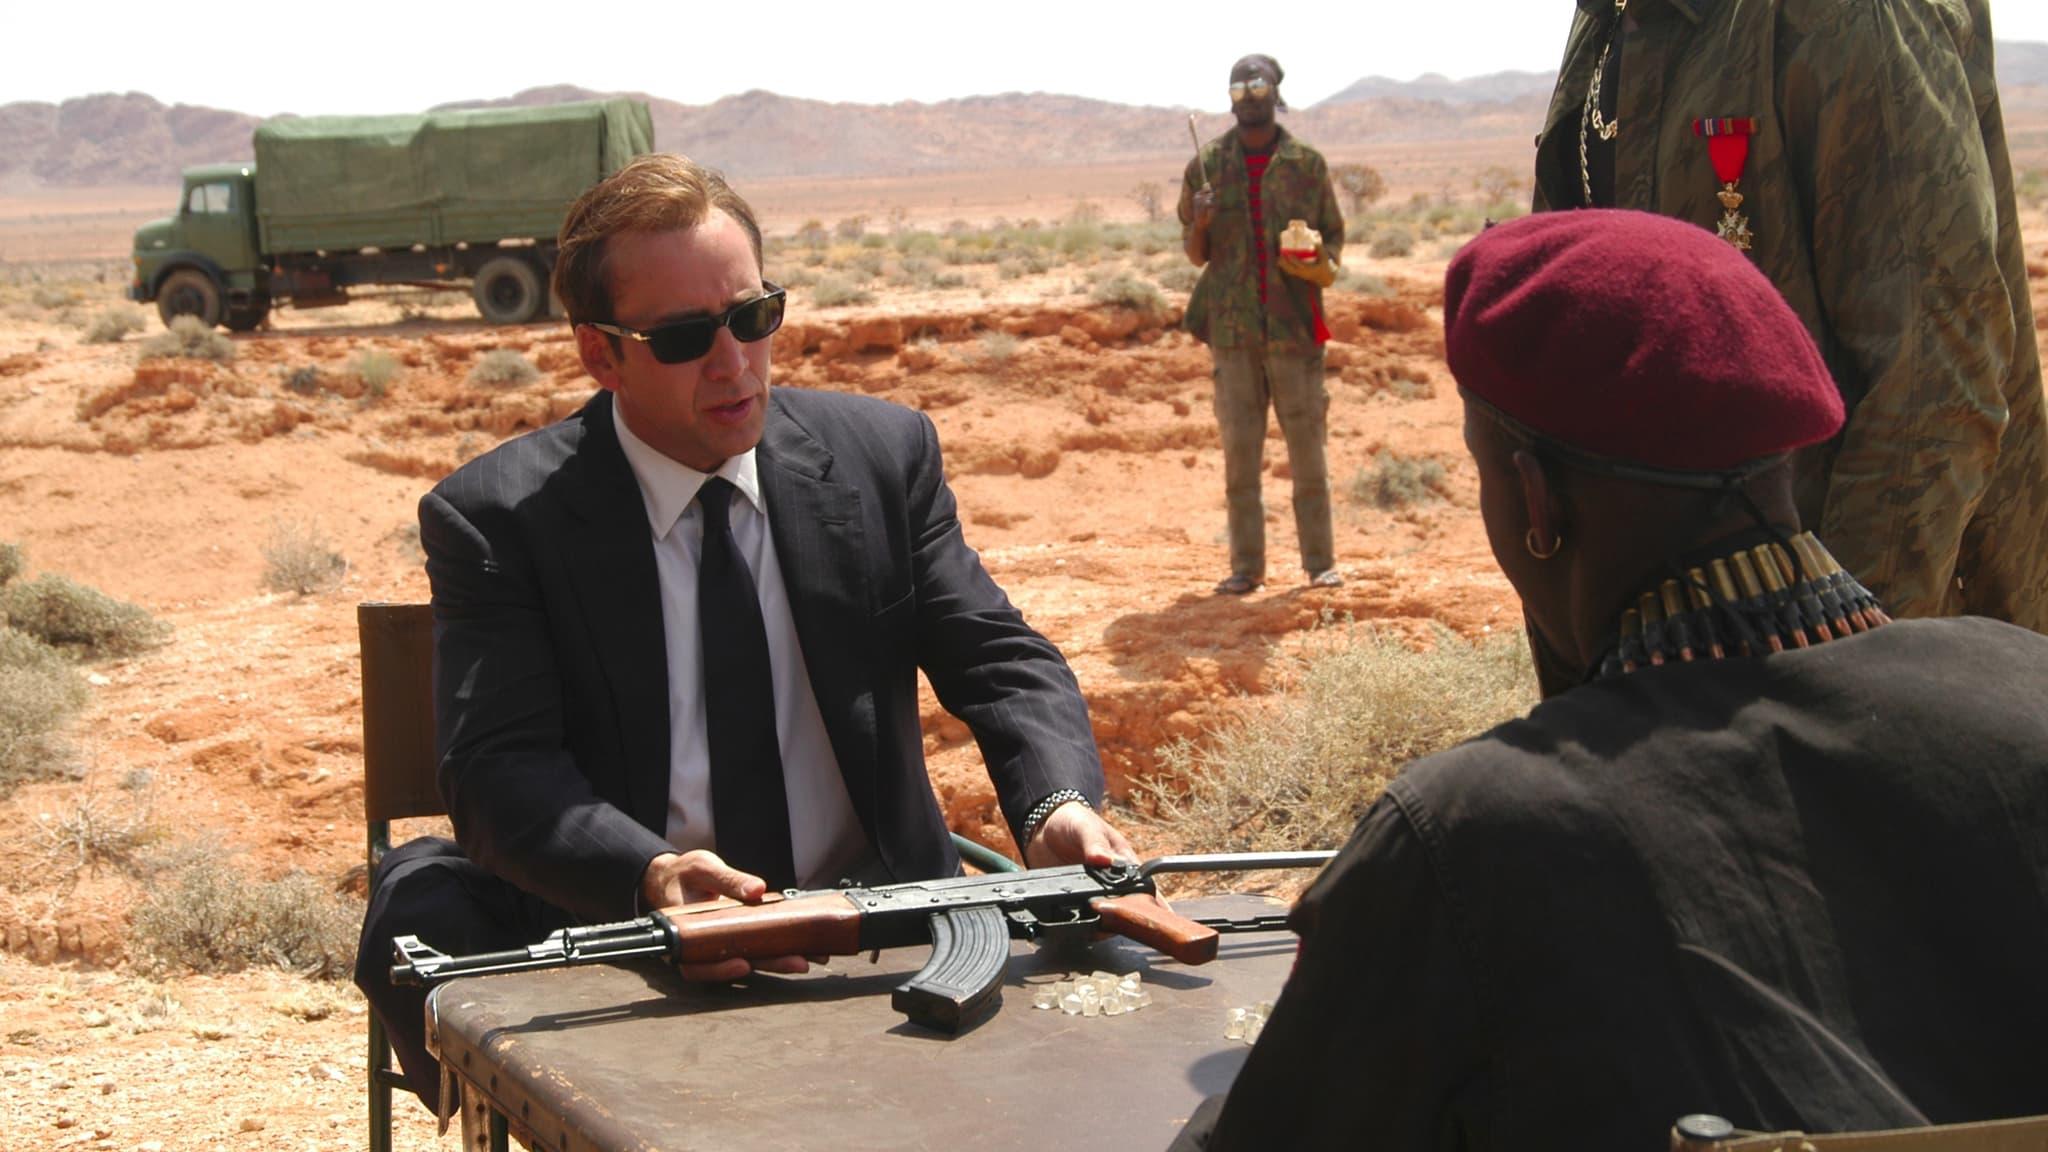 Lord of War backdrop